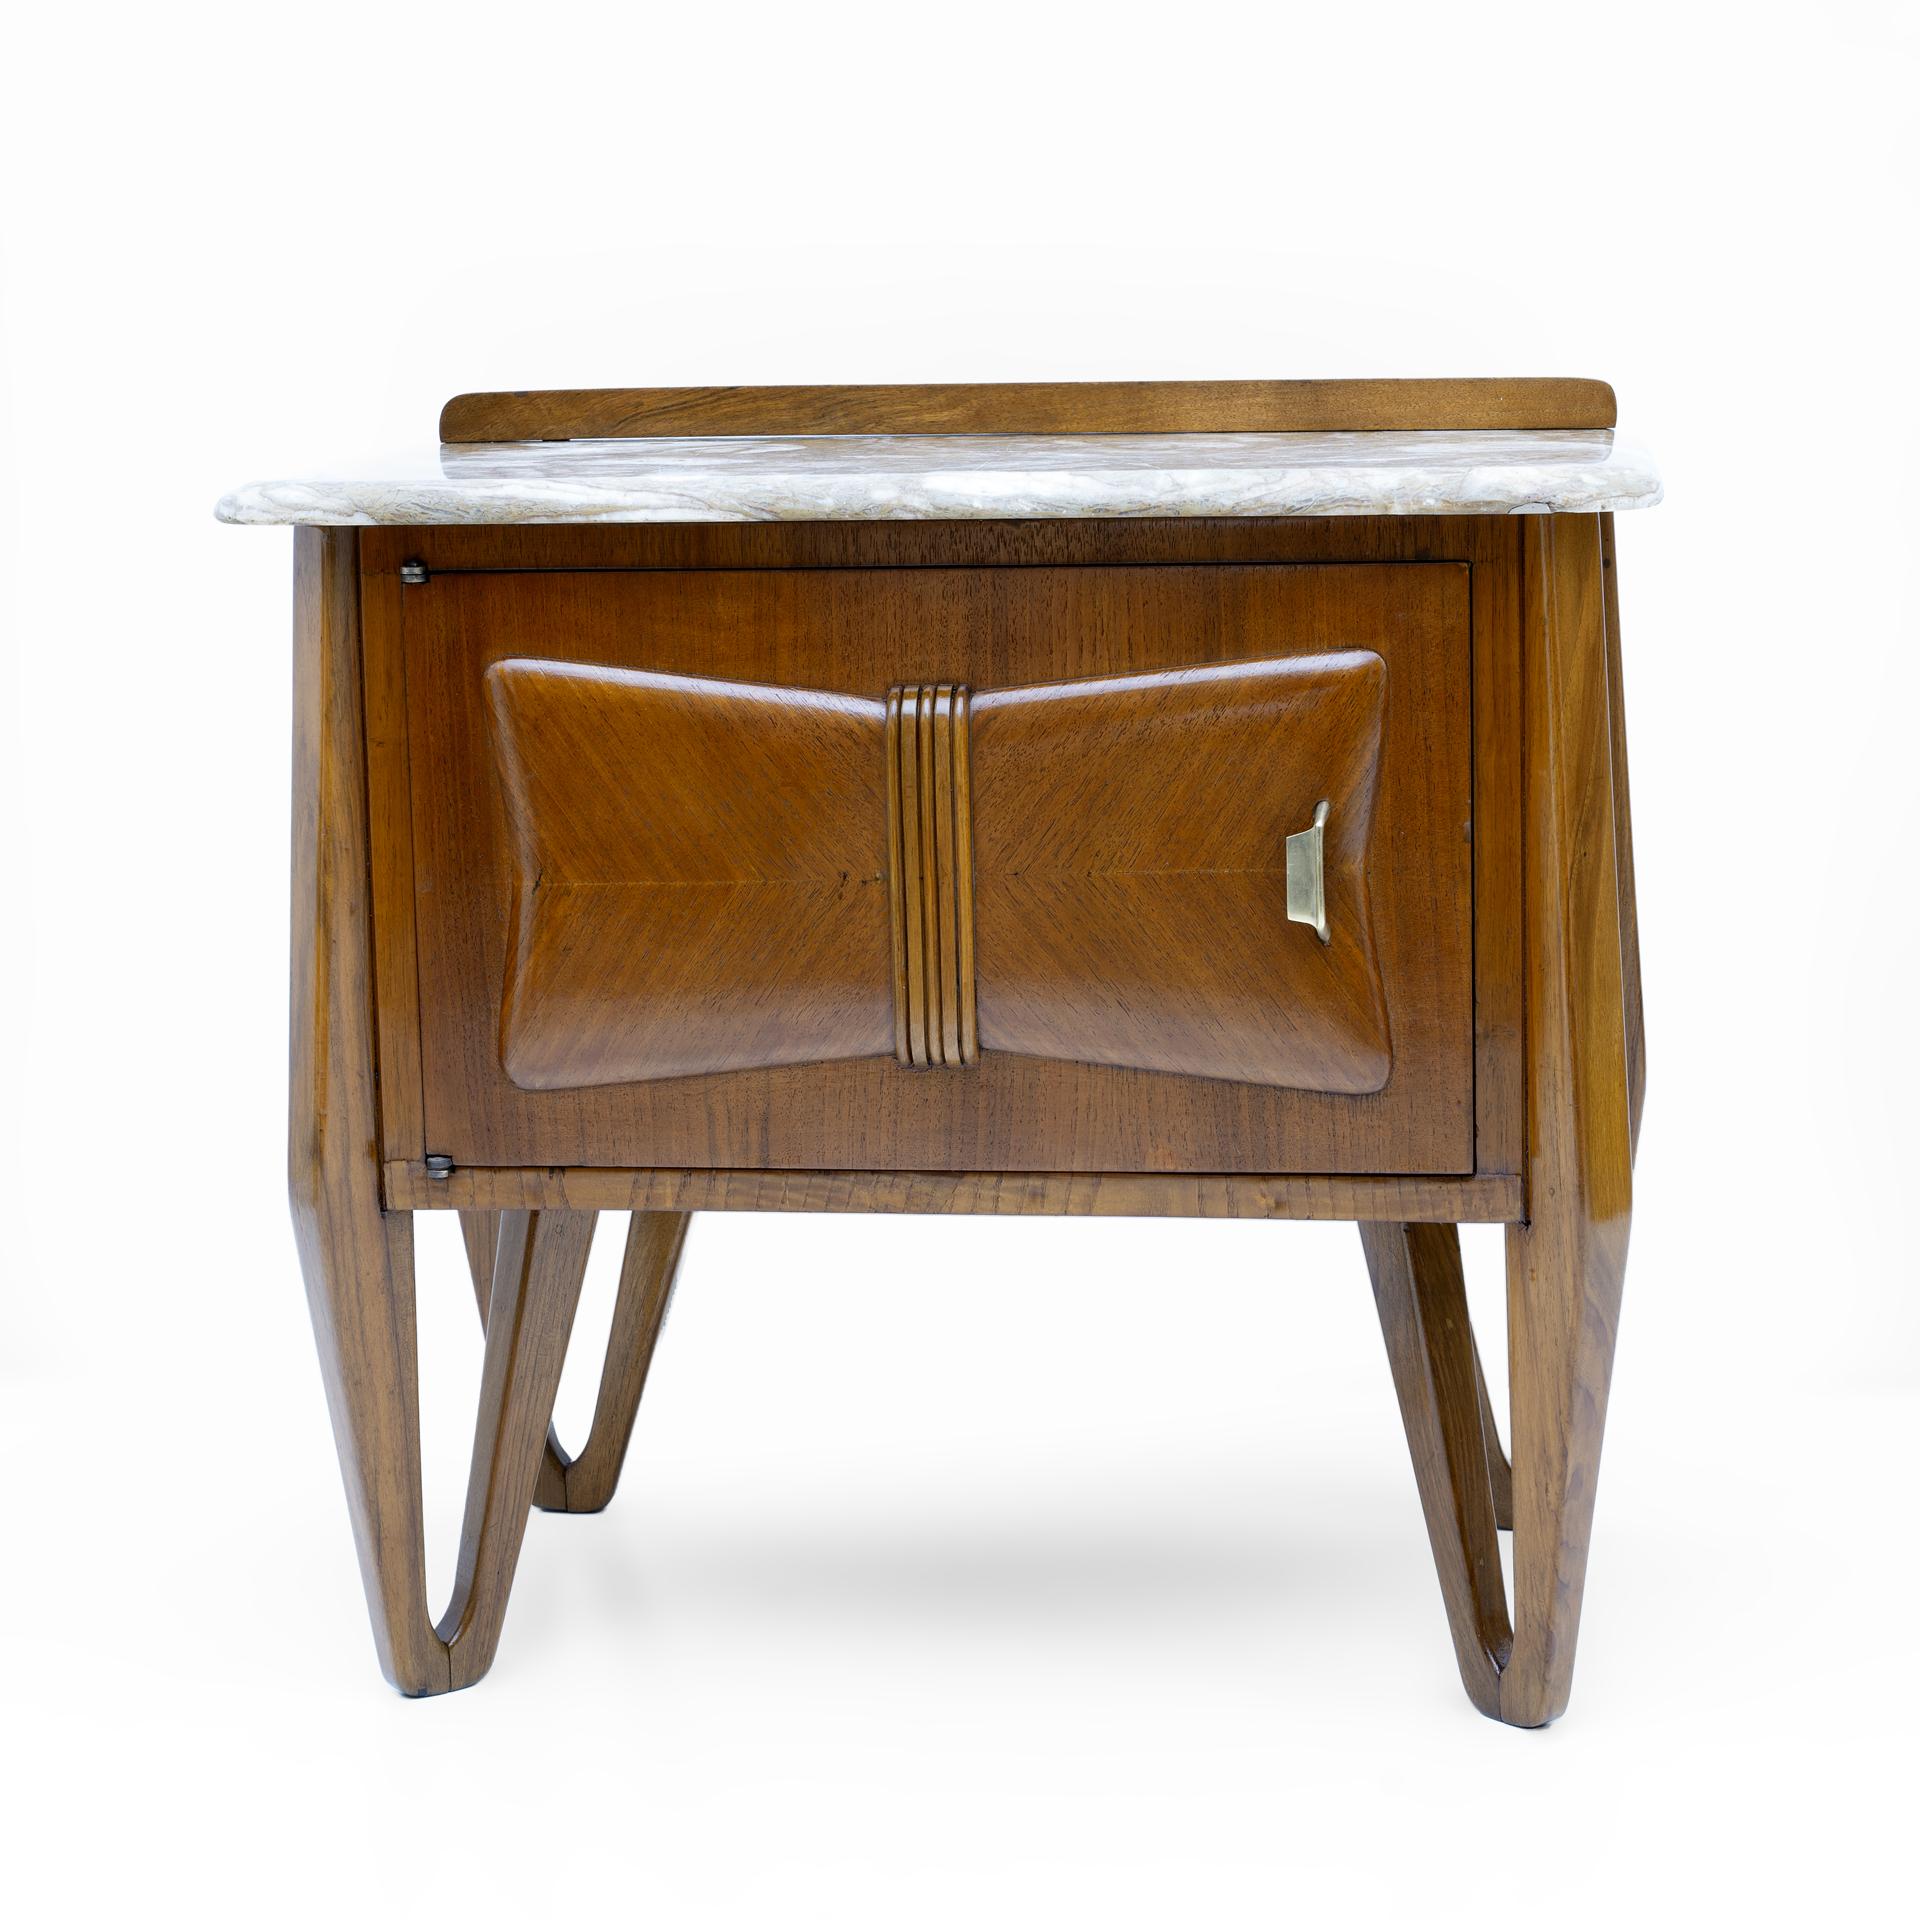 Mid-20th Century Pair of Mid-Century Modern Italian Walnut and Marble Nightstands, 1950s For Sale